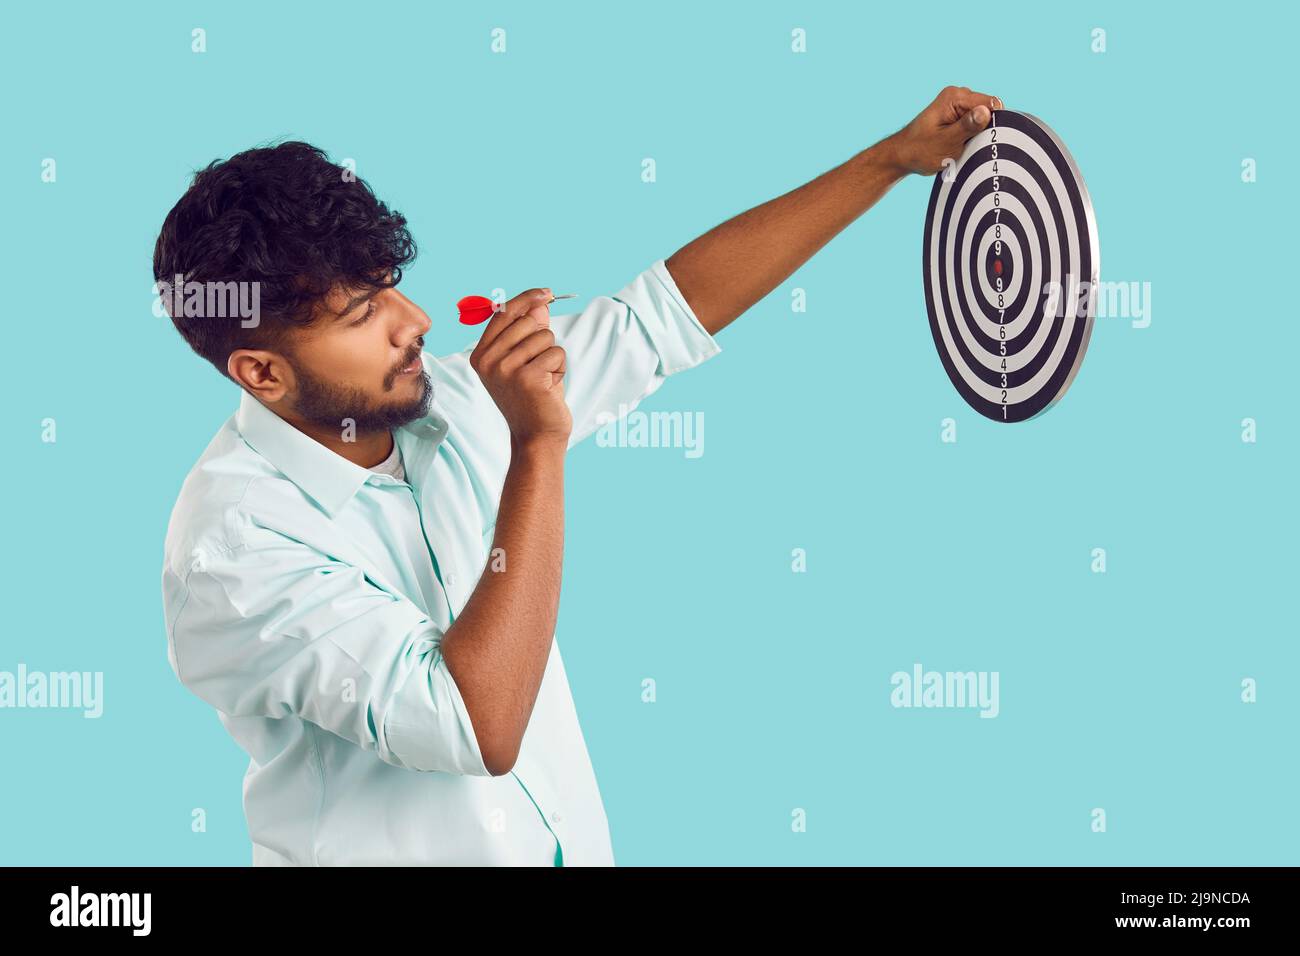 Side view of young Indian man holding target and aiming little arrow at bullseye Stock Photo